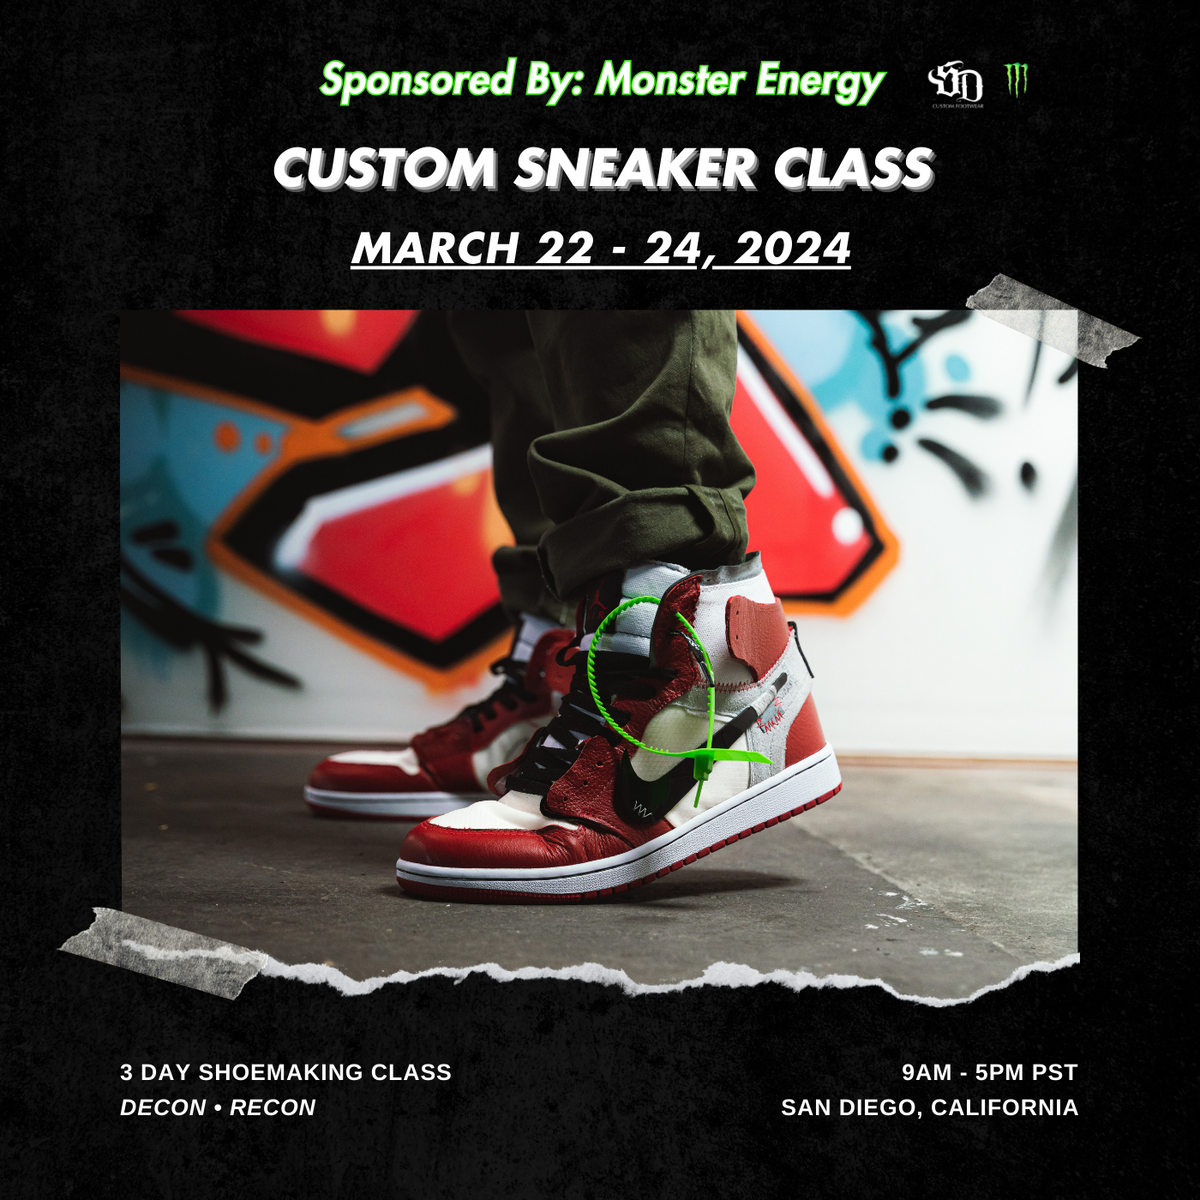 March 22 - 24, 2024: Shoemaking Class